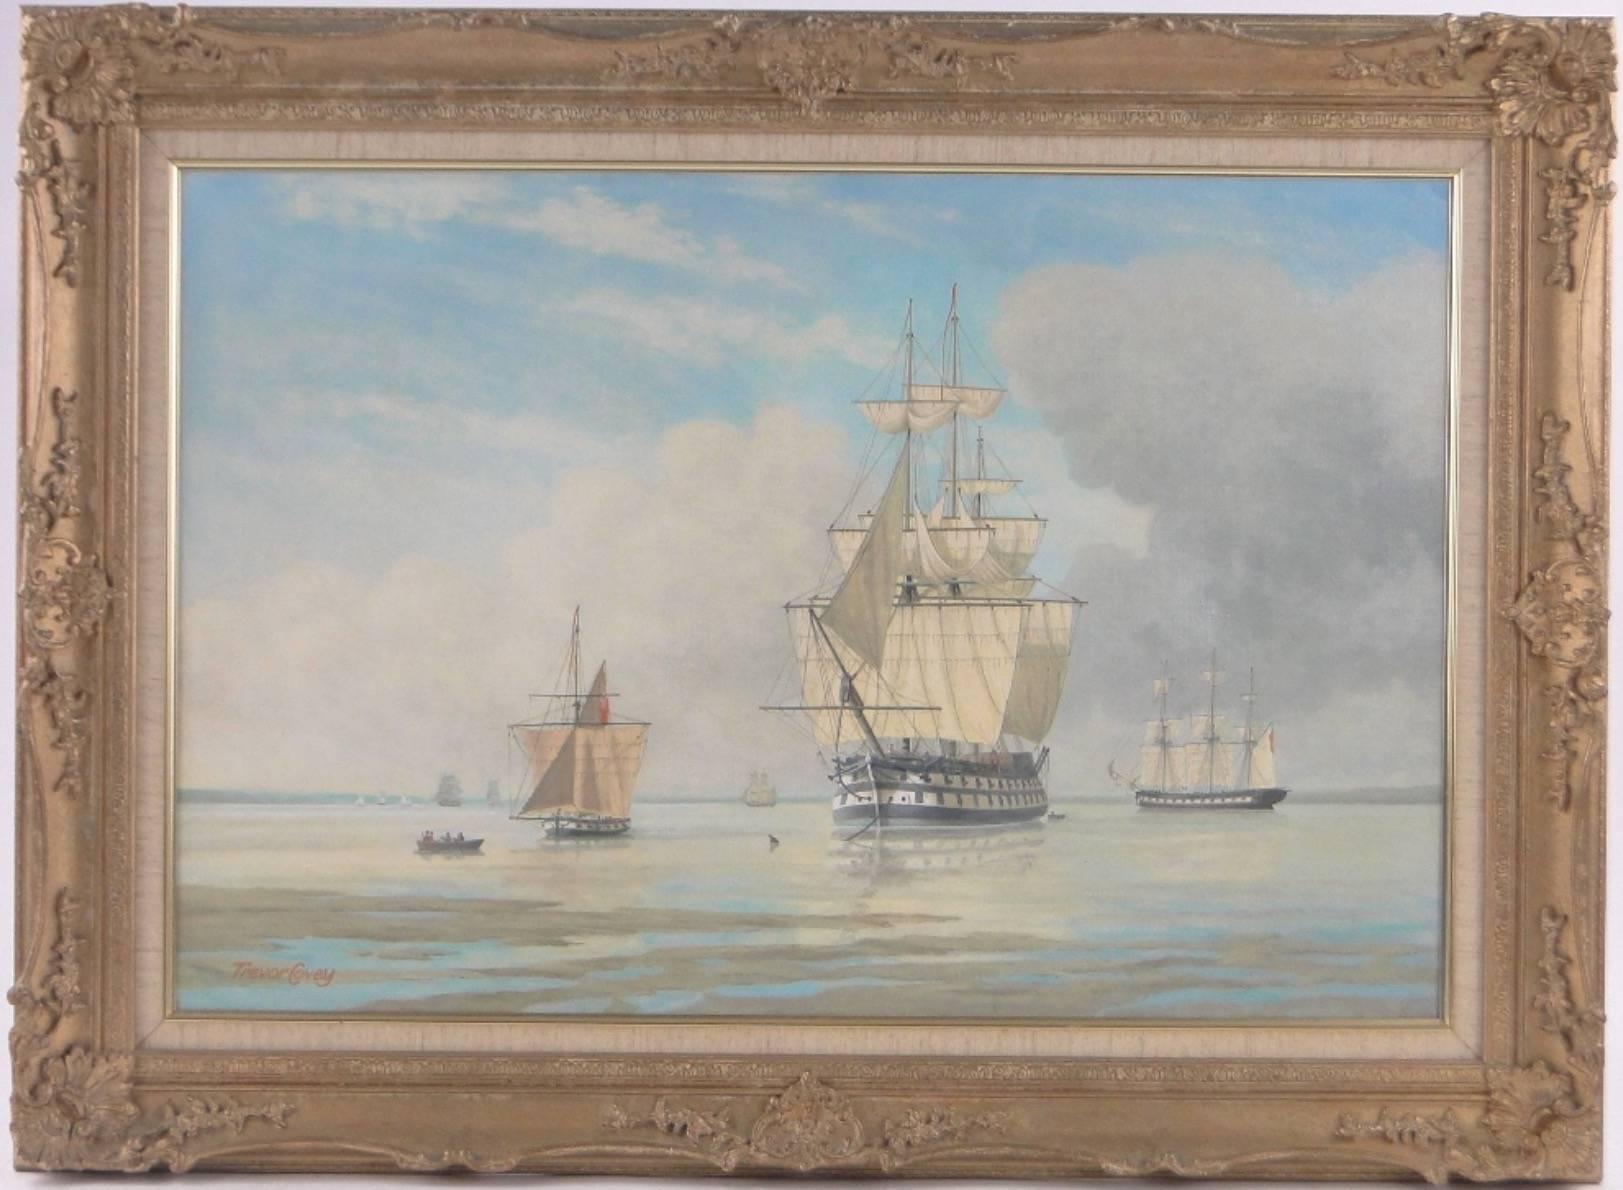 Very fine quality English maritime oil painting depicting this tranquil and calm seascape with 18th century Battle Ships off the coast. The painting is by the 20th century British marine painter, Trevor Covey (b.1936) and is signed to the lower